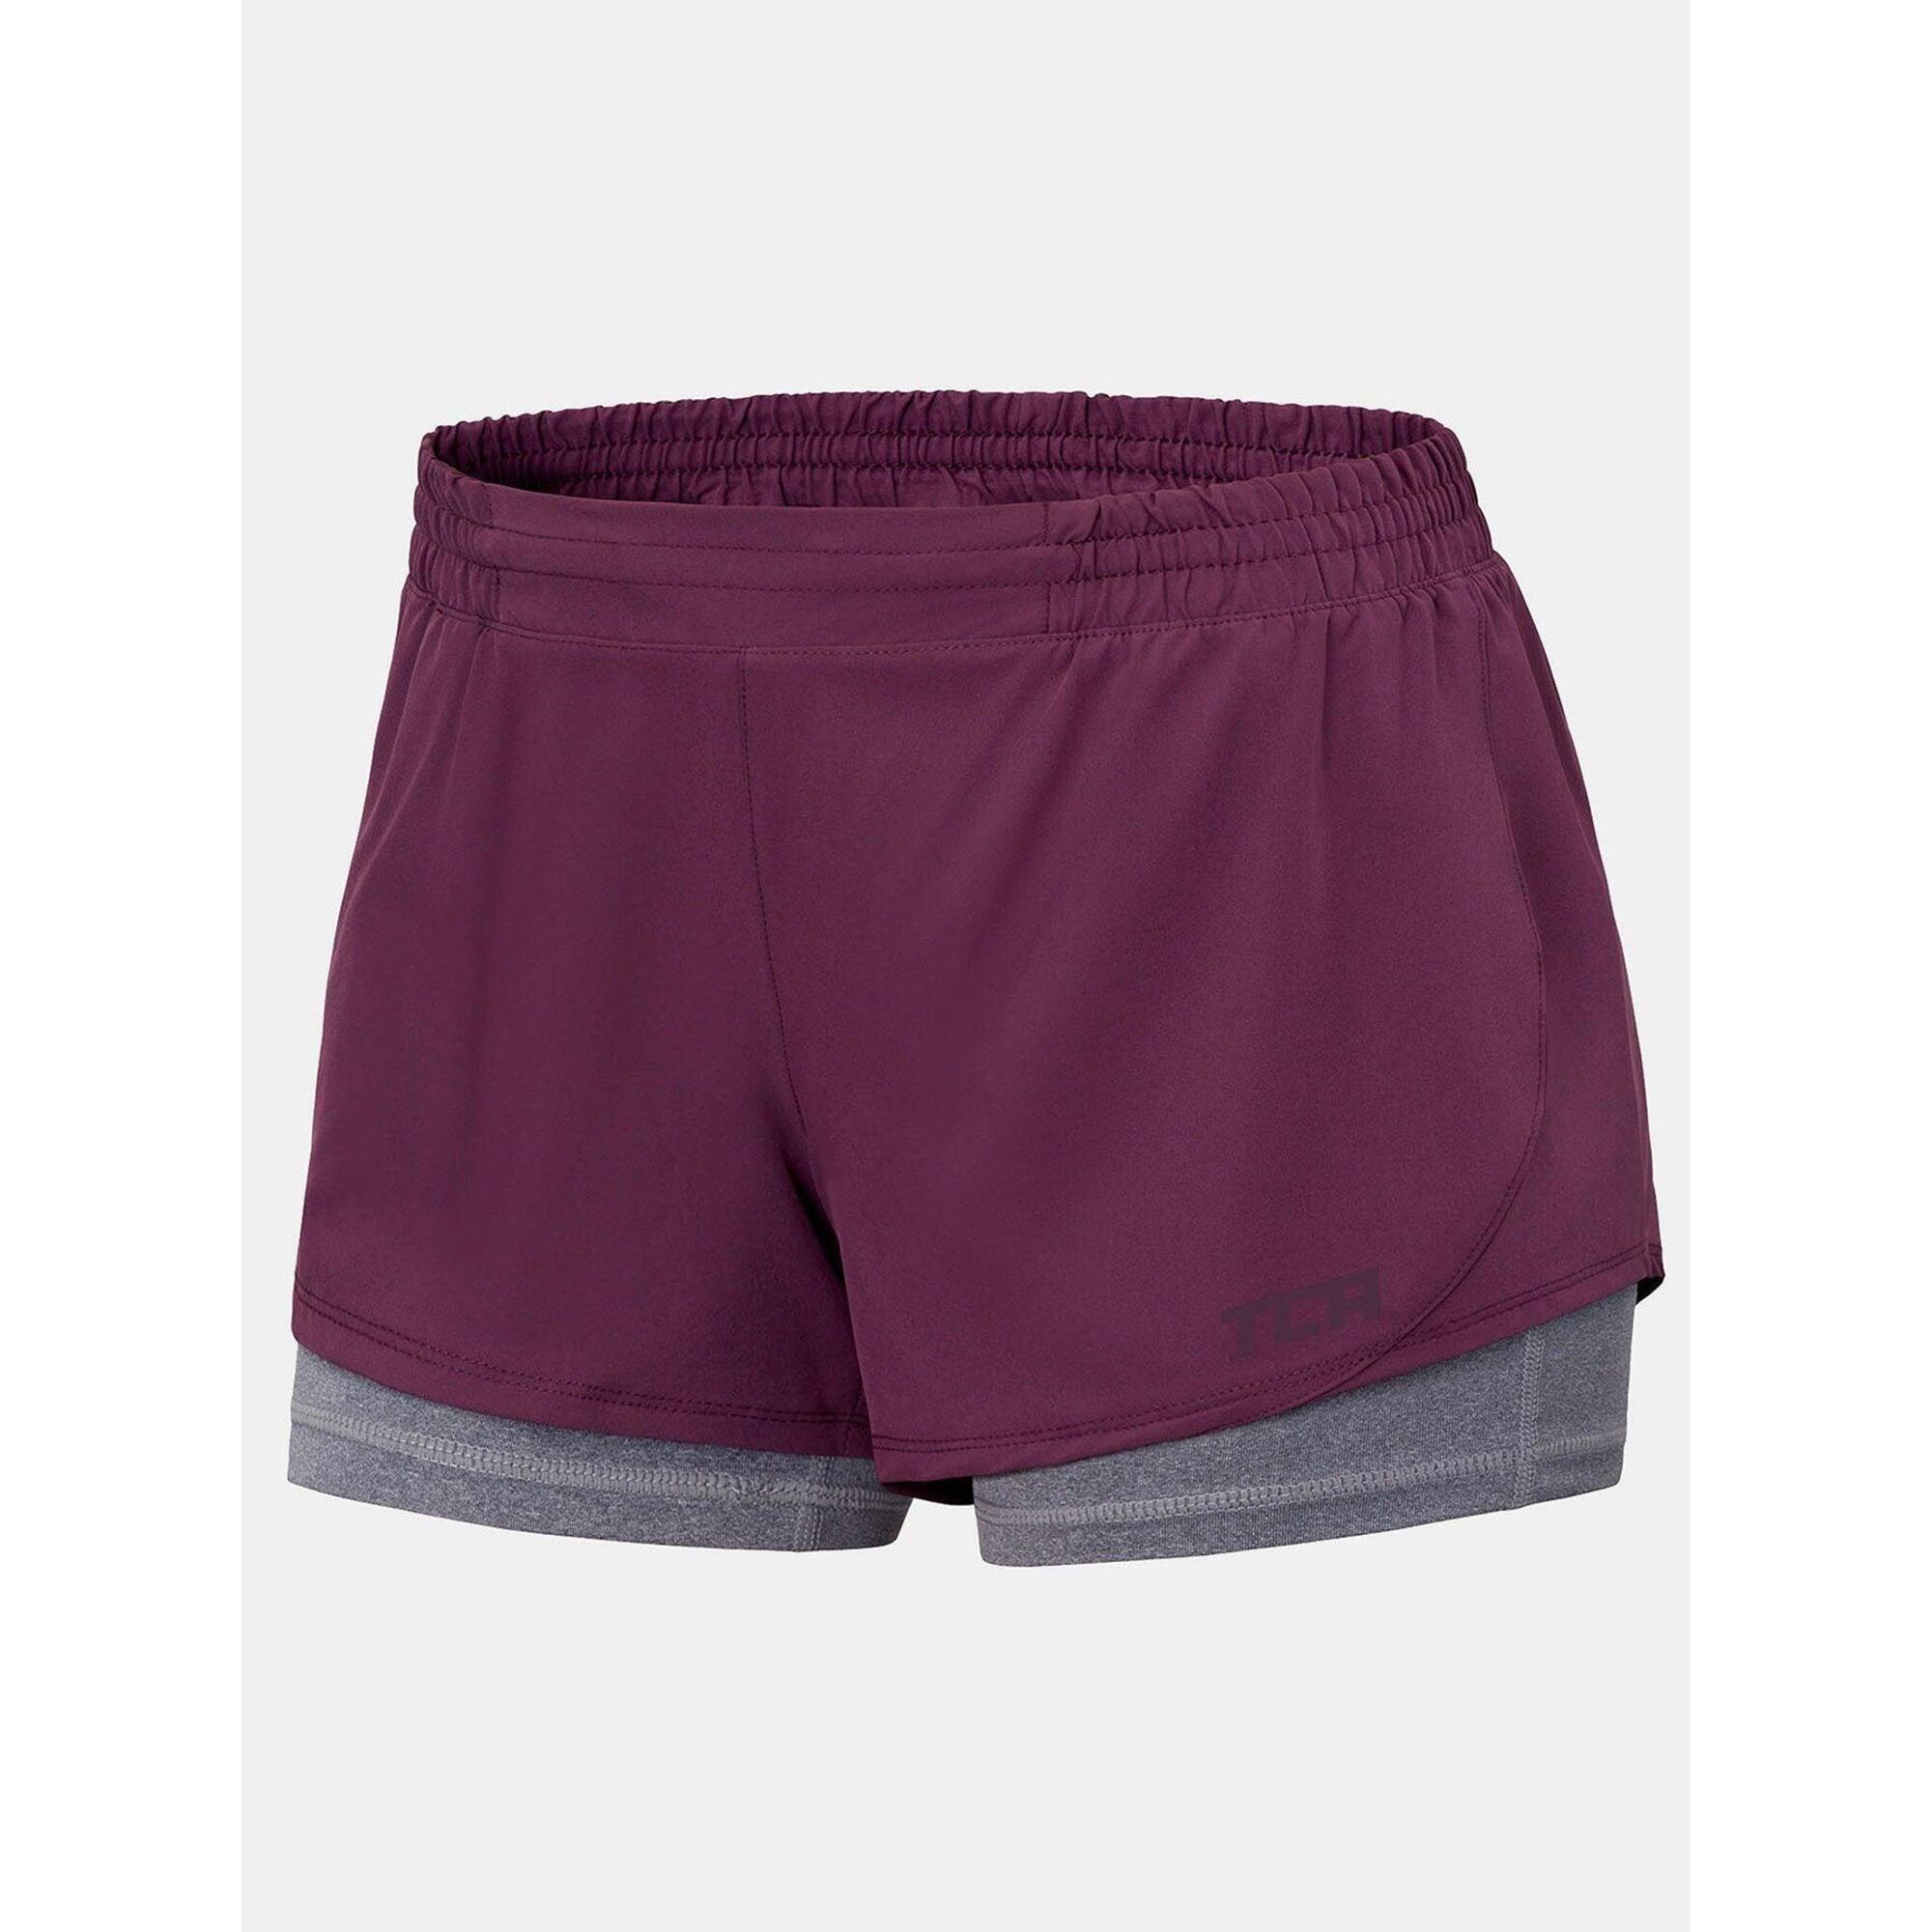 TCA Women’s Perform 2-in-1 Shorts with Zip Pocket - Prune/Mid Grey